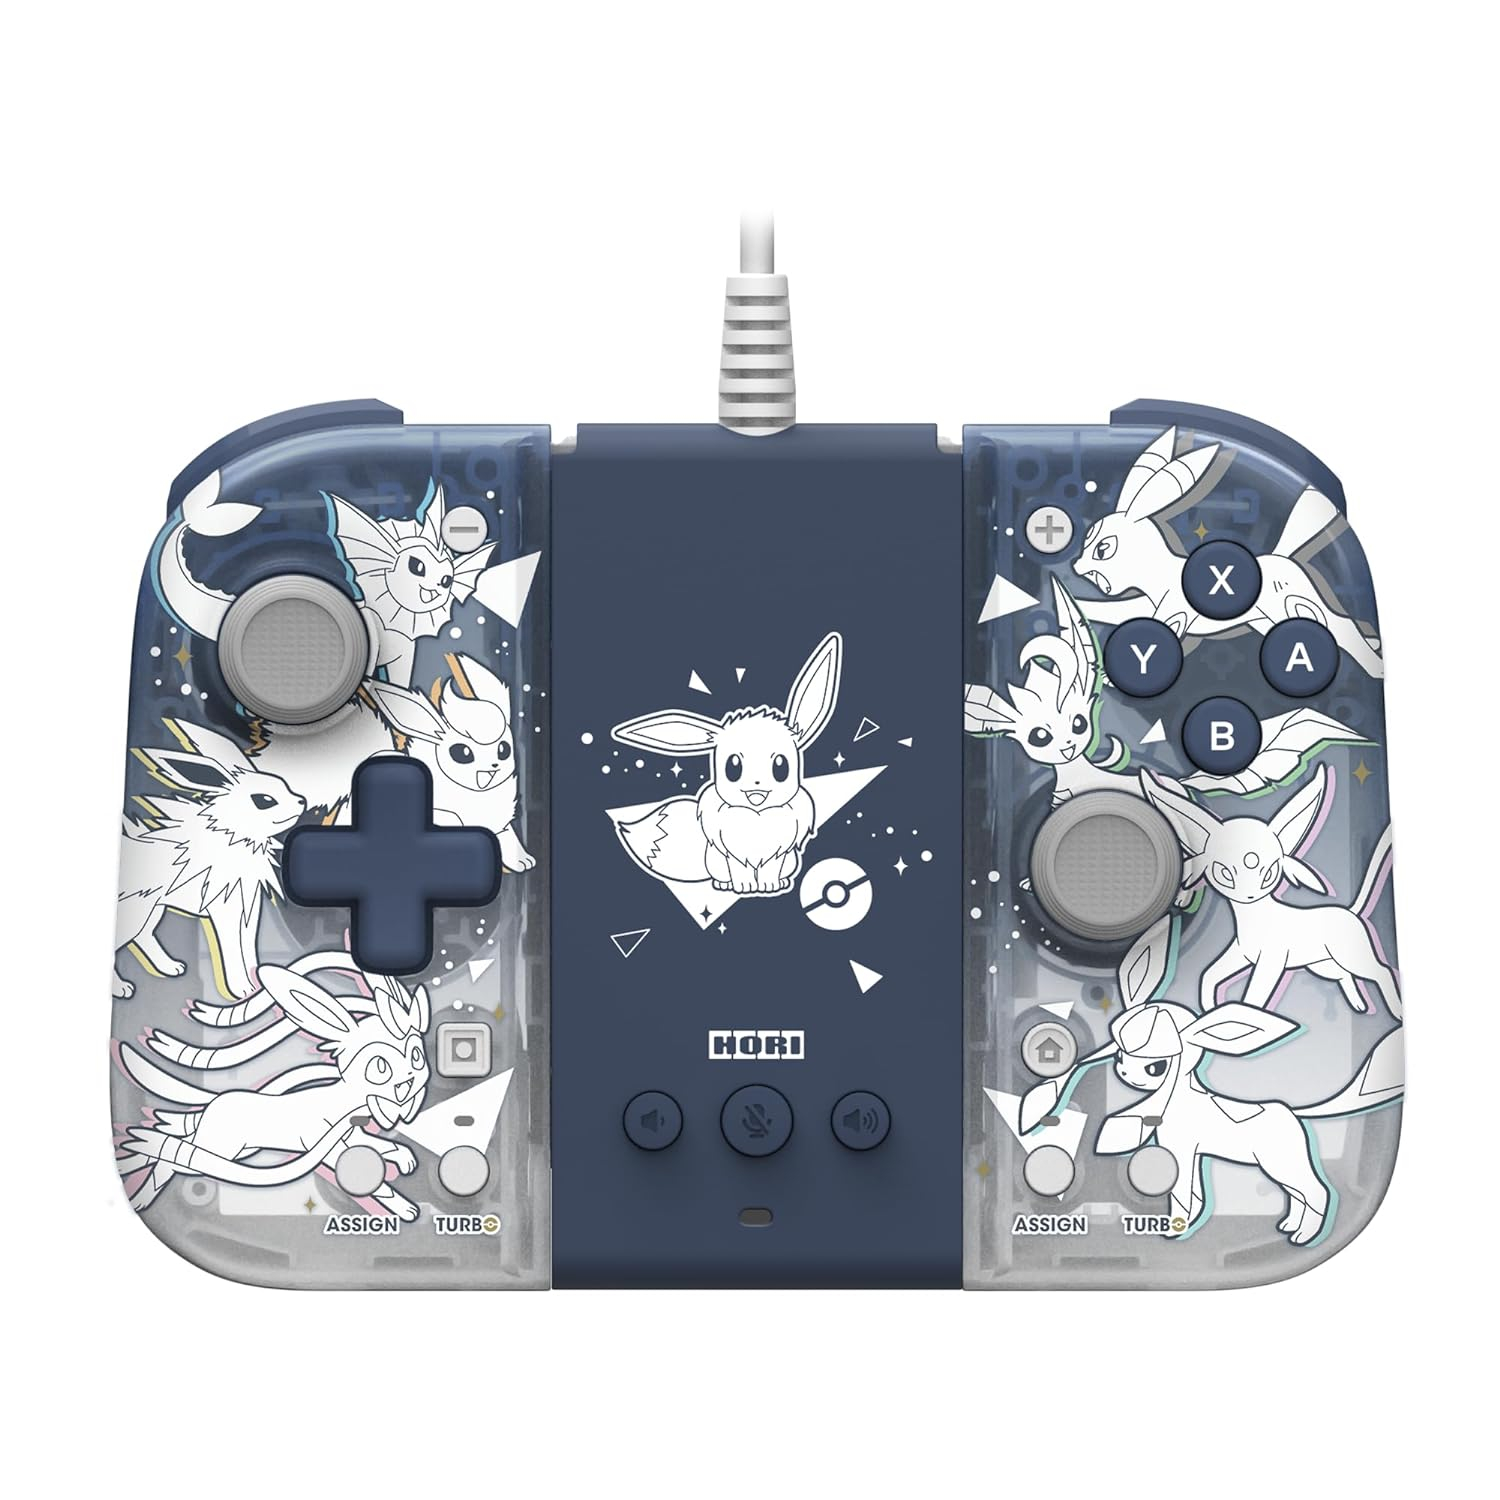 HORI Split Pad Compact Attachment Set (Eevee) for Nintendo Switch - Officially Licensed By Nintendo and The Pokémon Company International